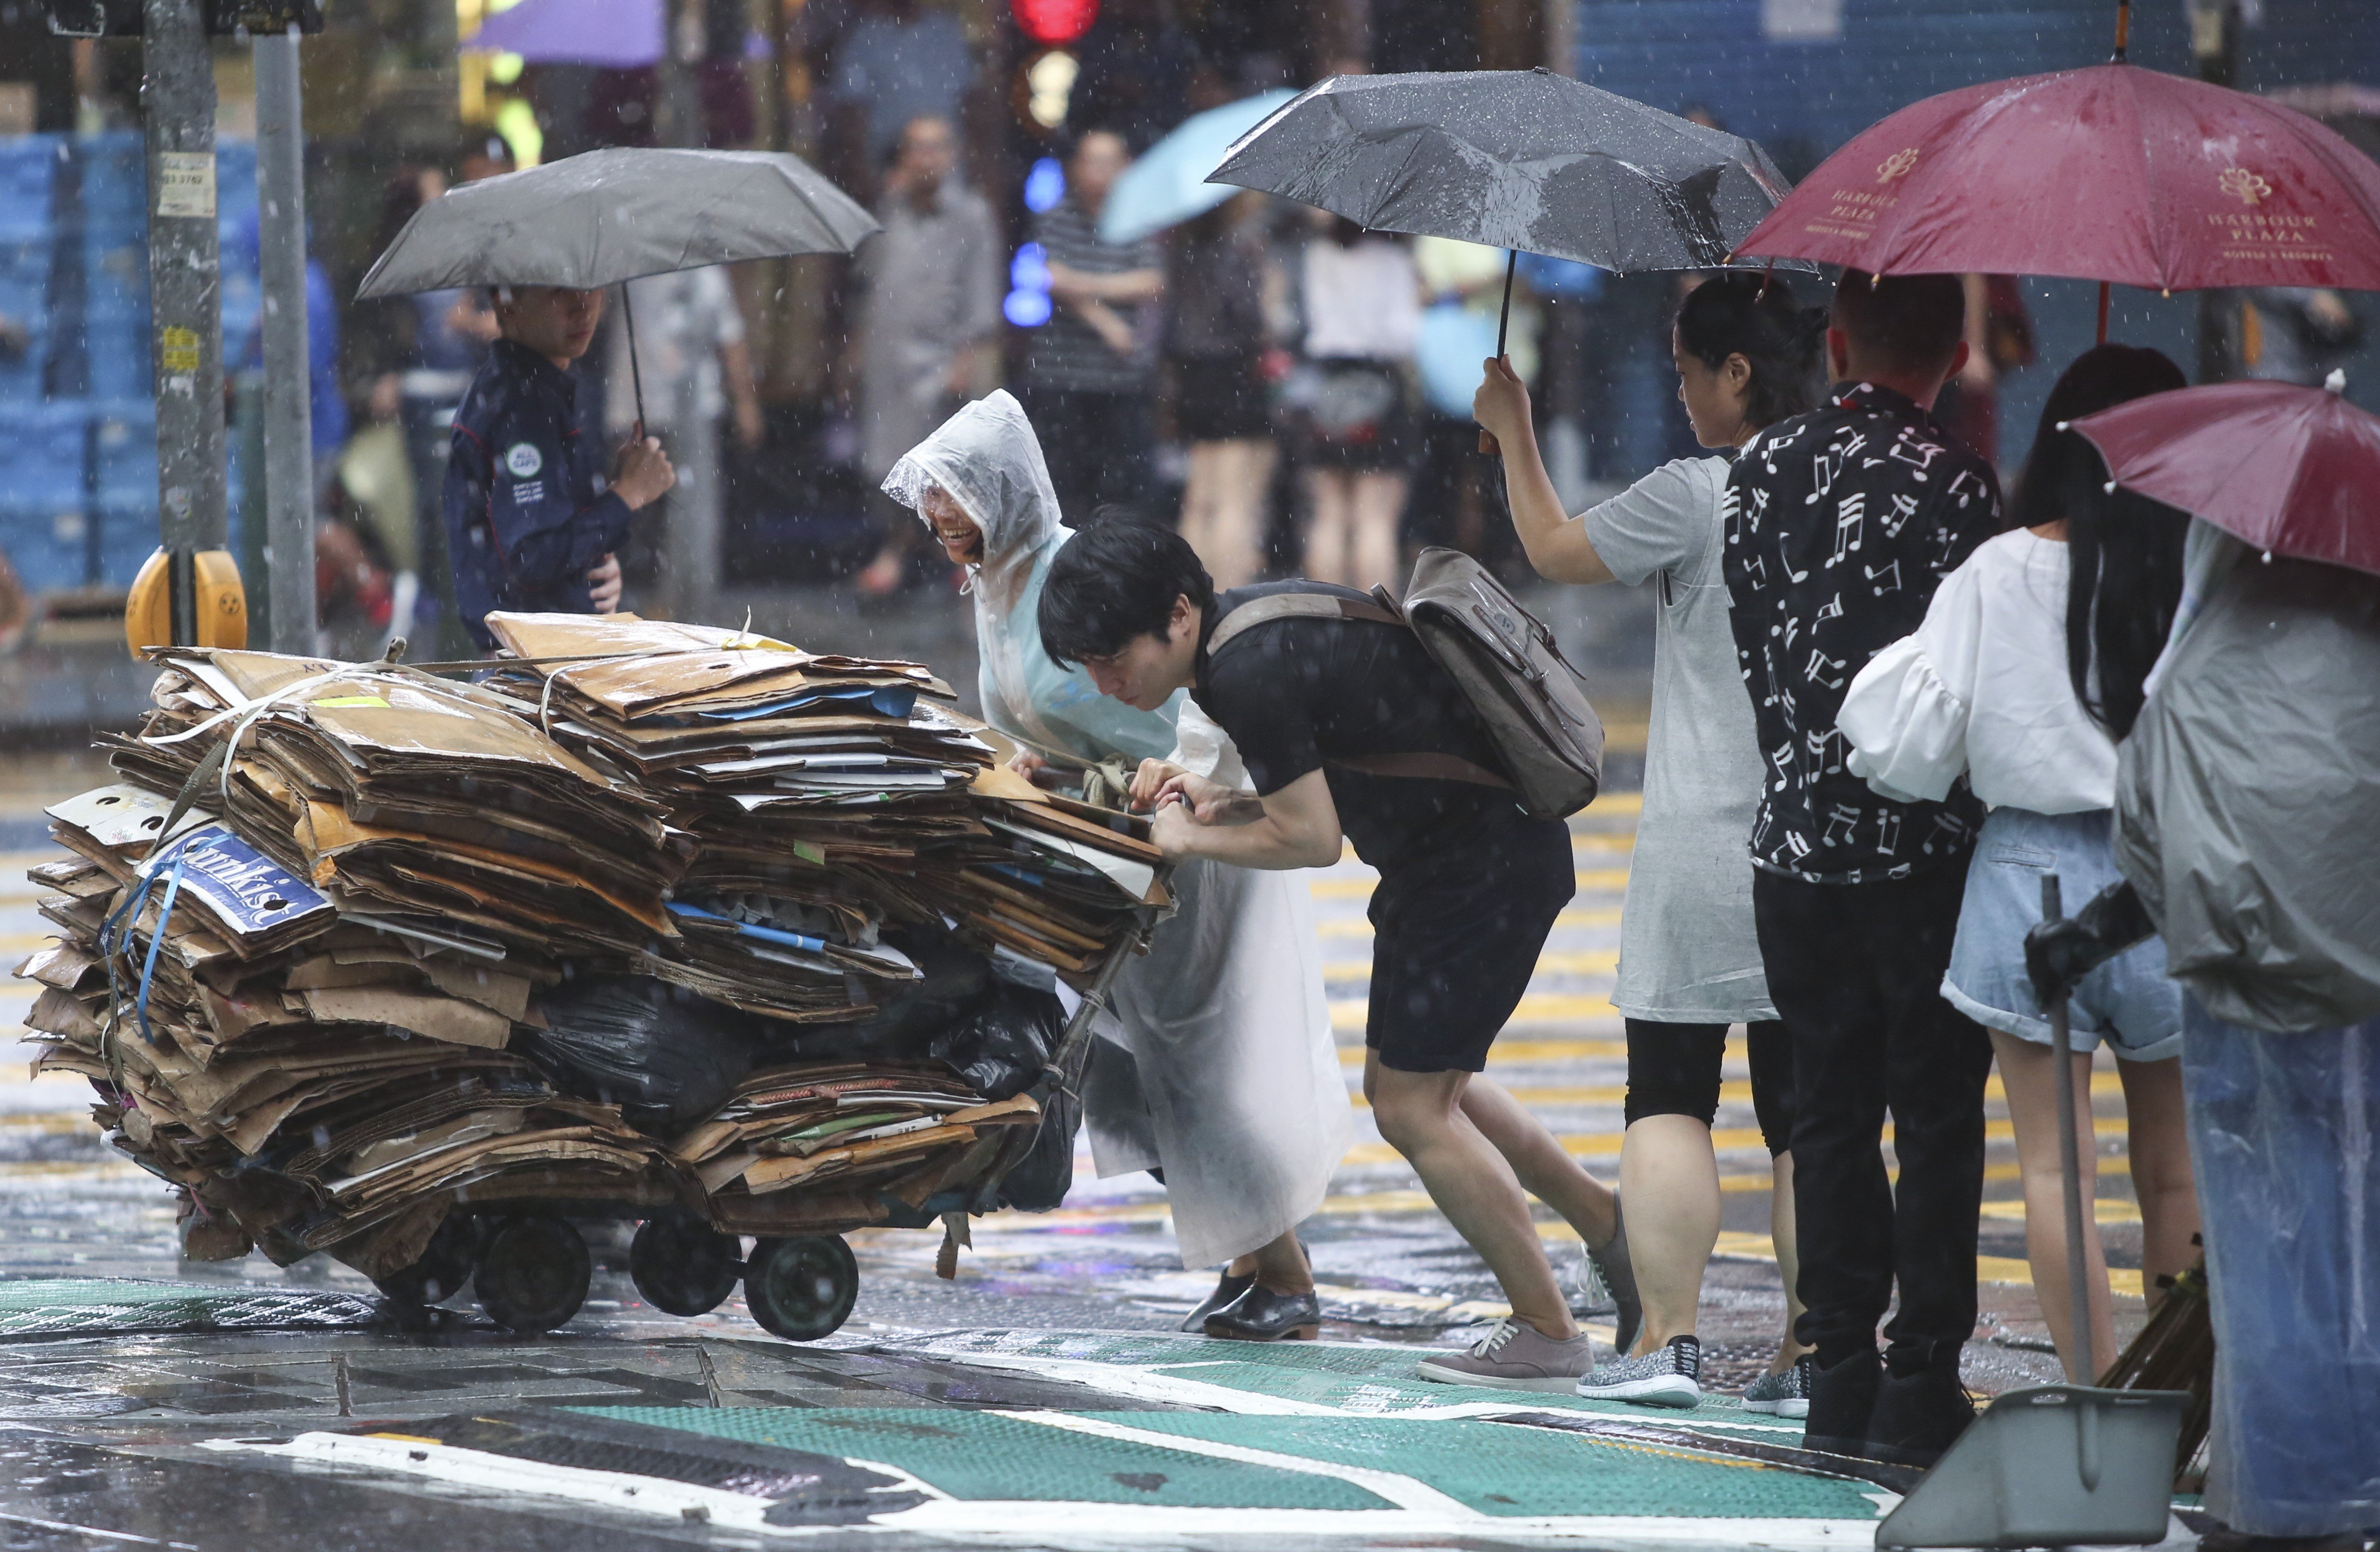 A young man helps an elderly woman push a trolley of cardboard sheets she collected for recycling during a rainy day in Hong Kong, in May 2017. A larger proportion of Hong Kong’s elderly than its working-age population live in public housing, a fact not reflected in the city’s poverty line calculations. Photo: Sam Tsang